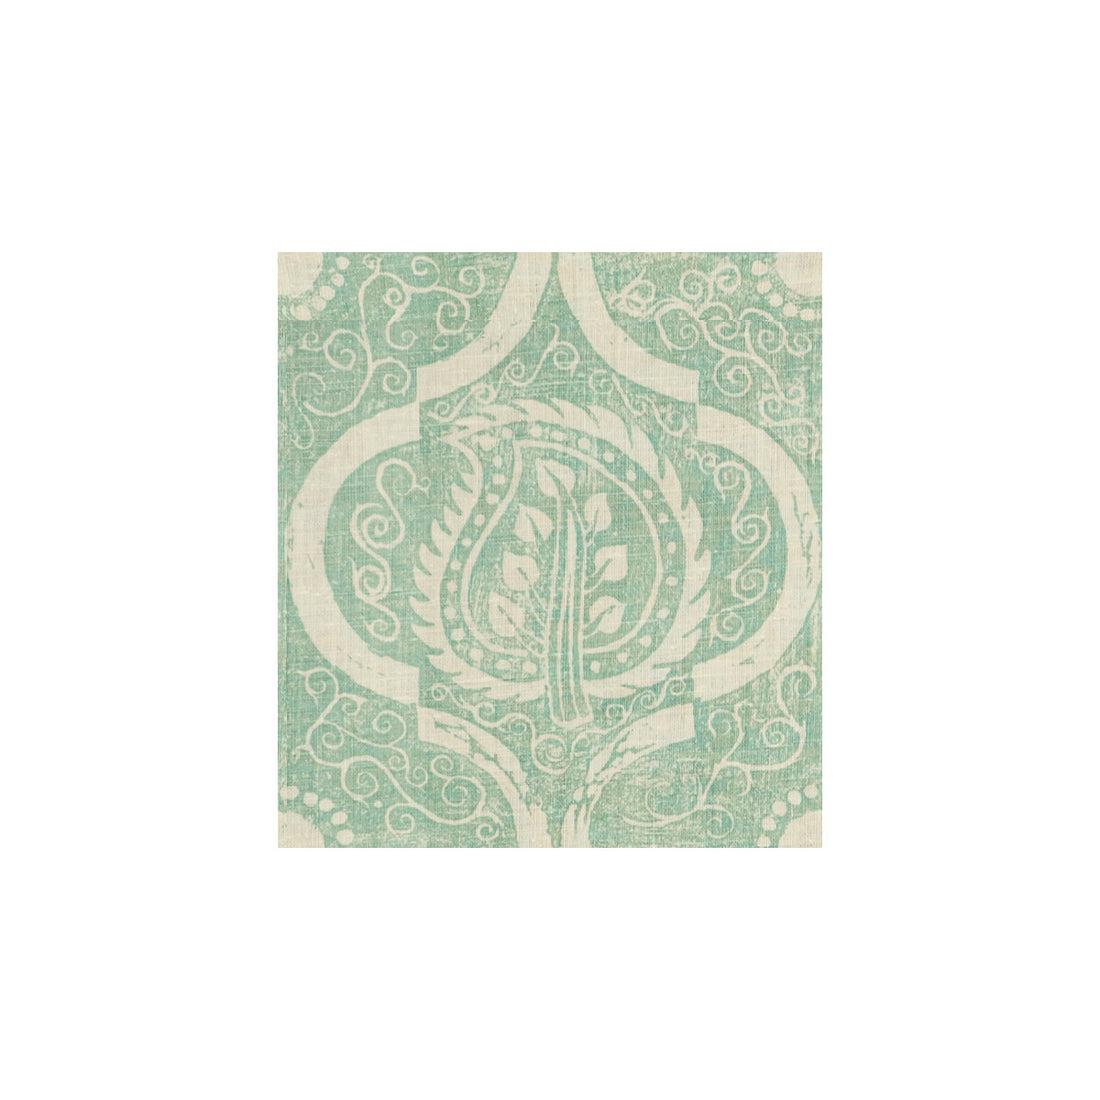 Persian Leaf fabric in aqua color - pattern BFC-3516.13.0 - by Lee Jofa in the Blithfield collection